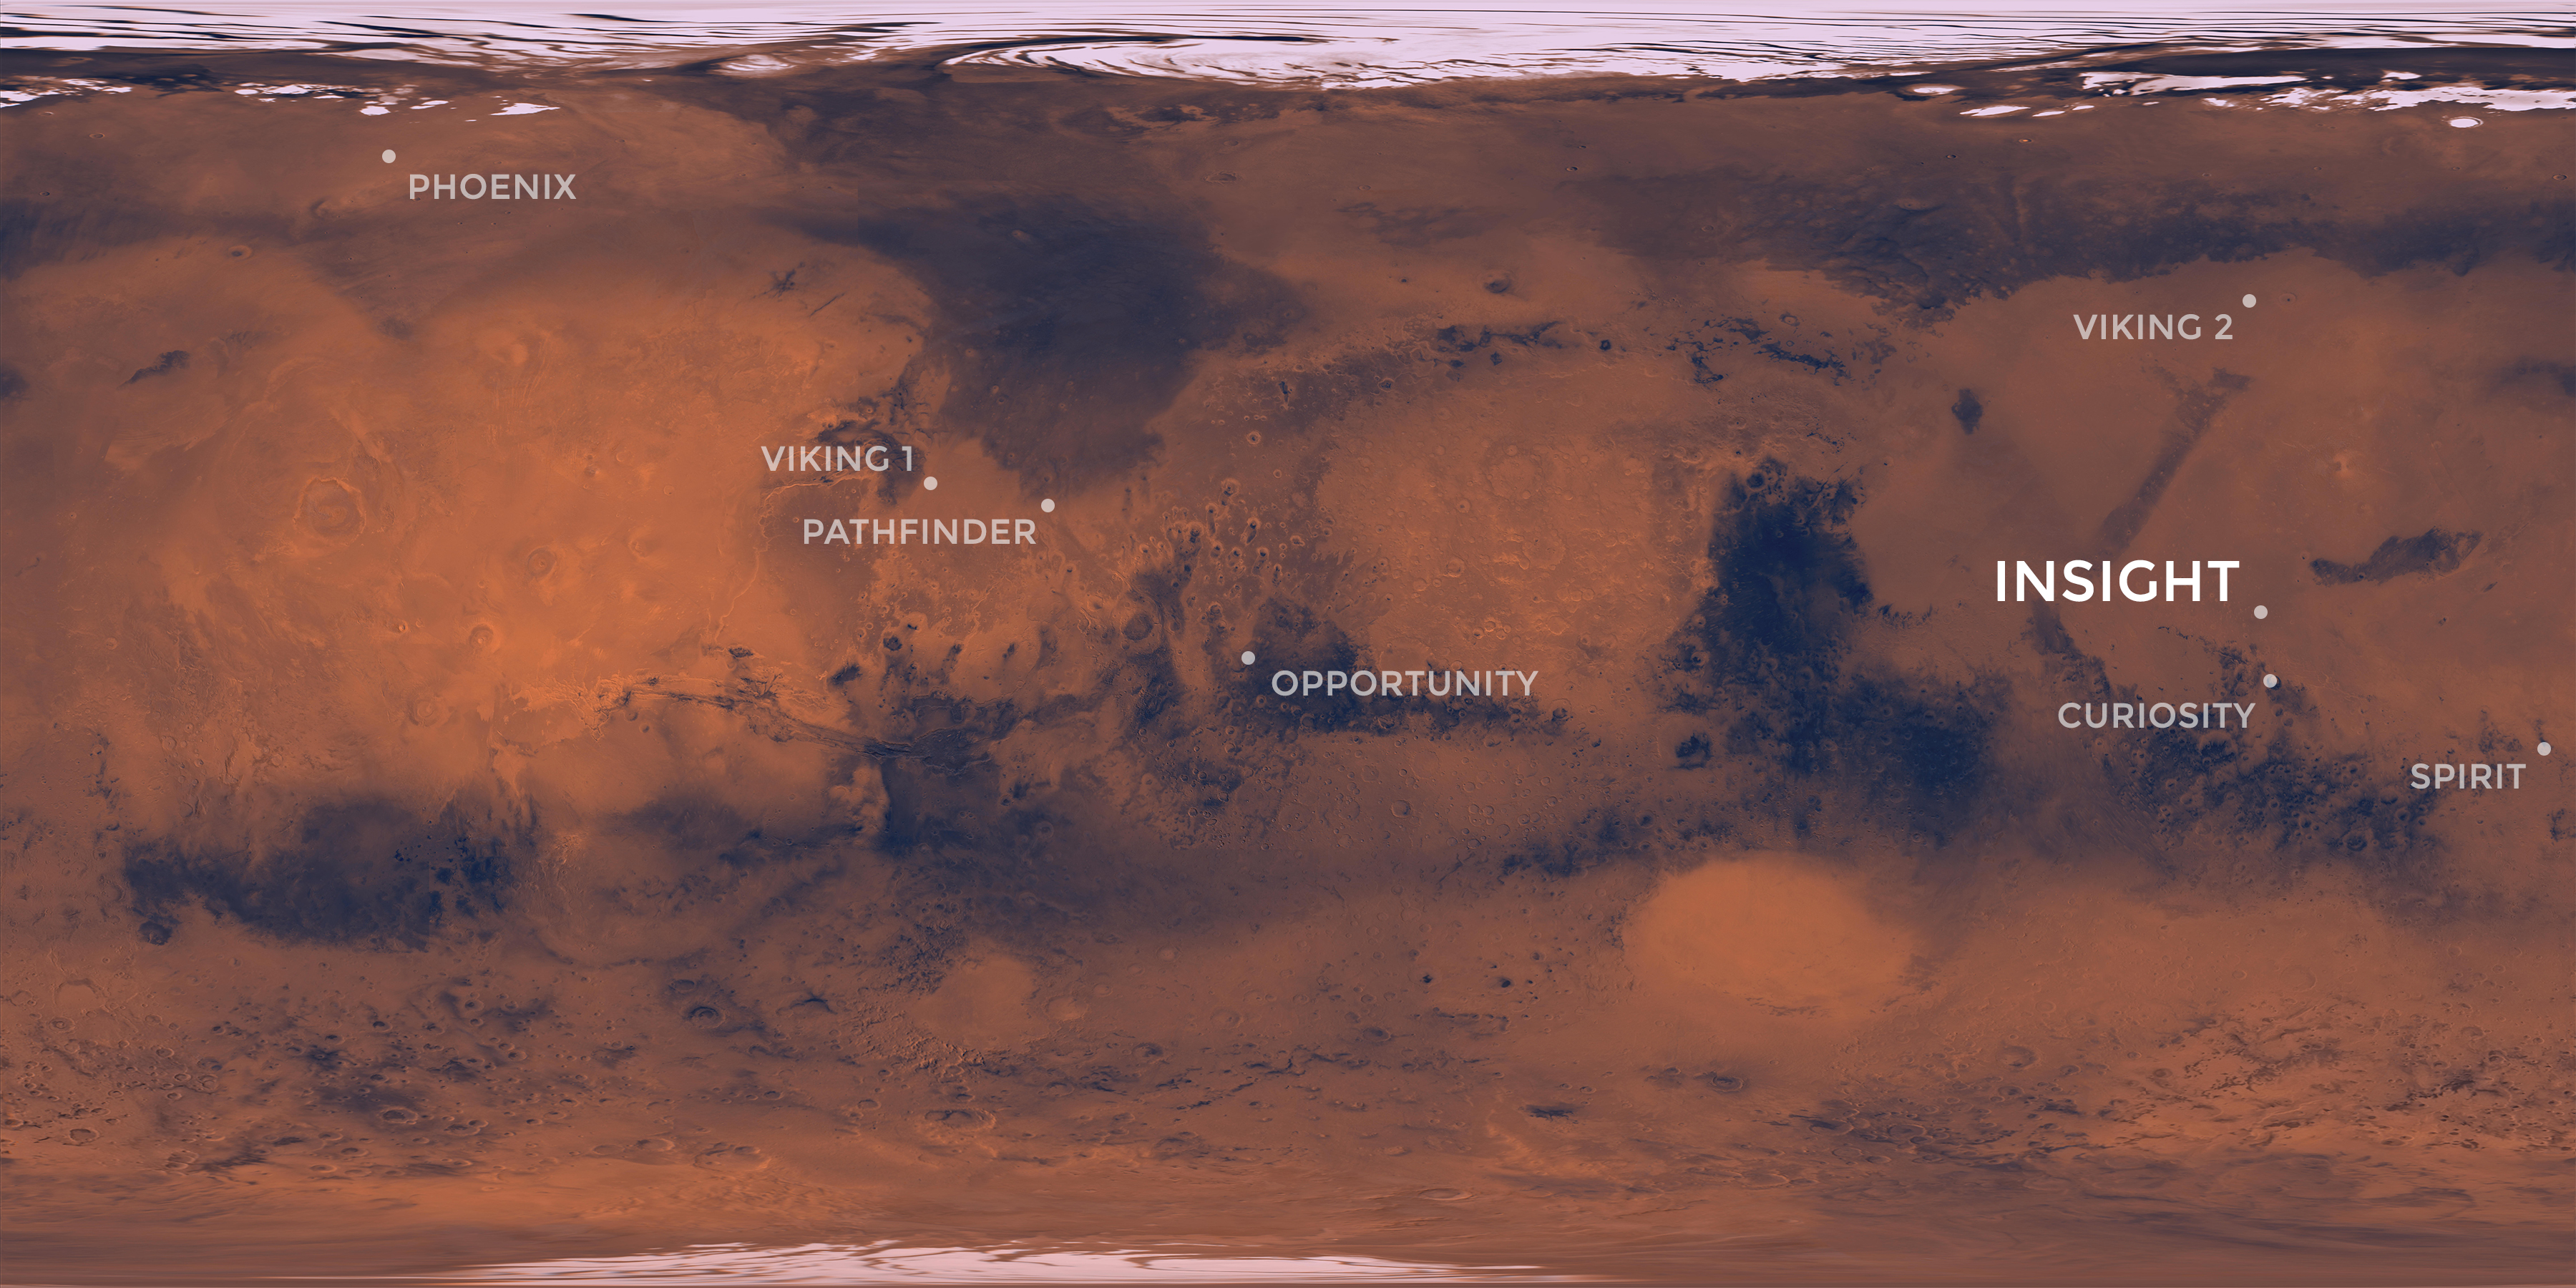 Map of Mars with spacecraft landing sites labeled.